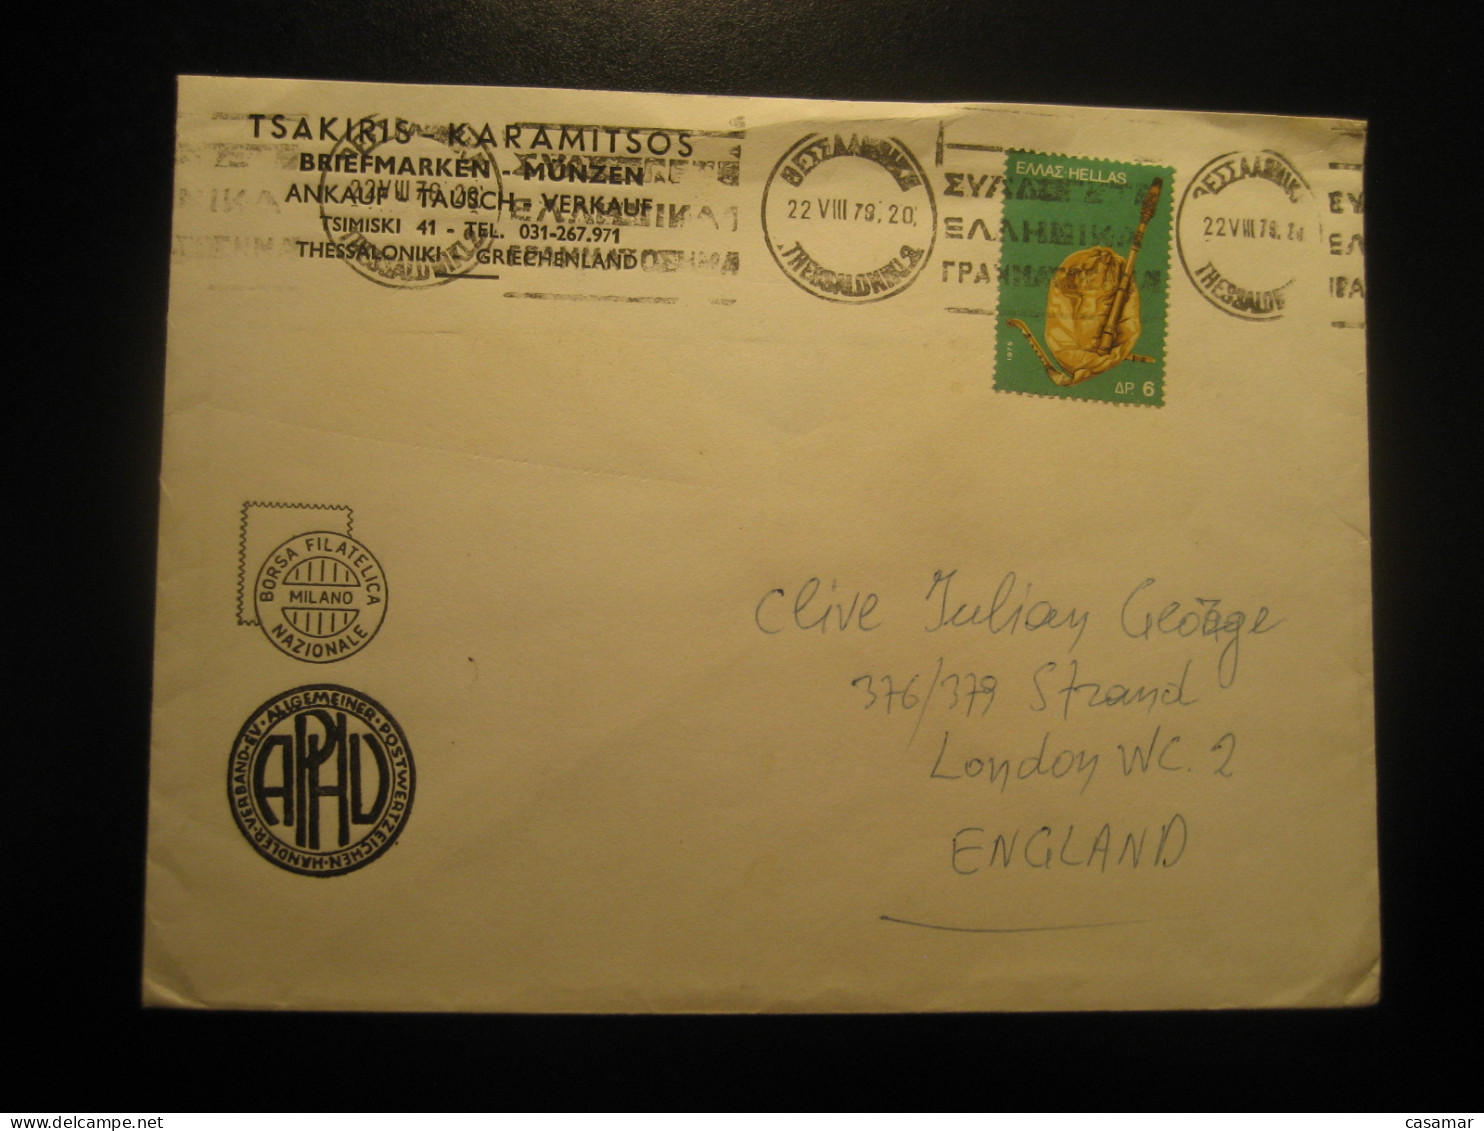 THESSALONIKI 1979 To London England Cancel Cover Stamp GREECE - Covers & Documents